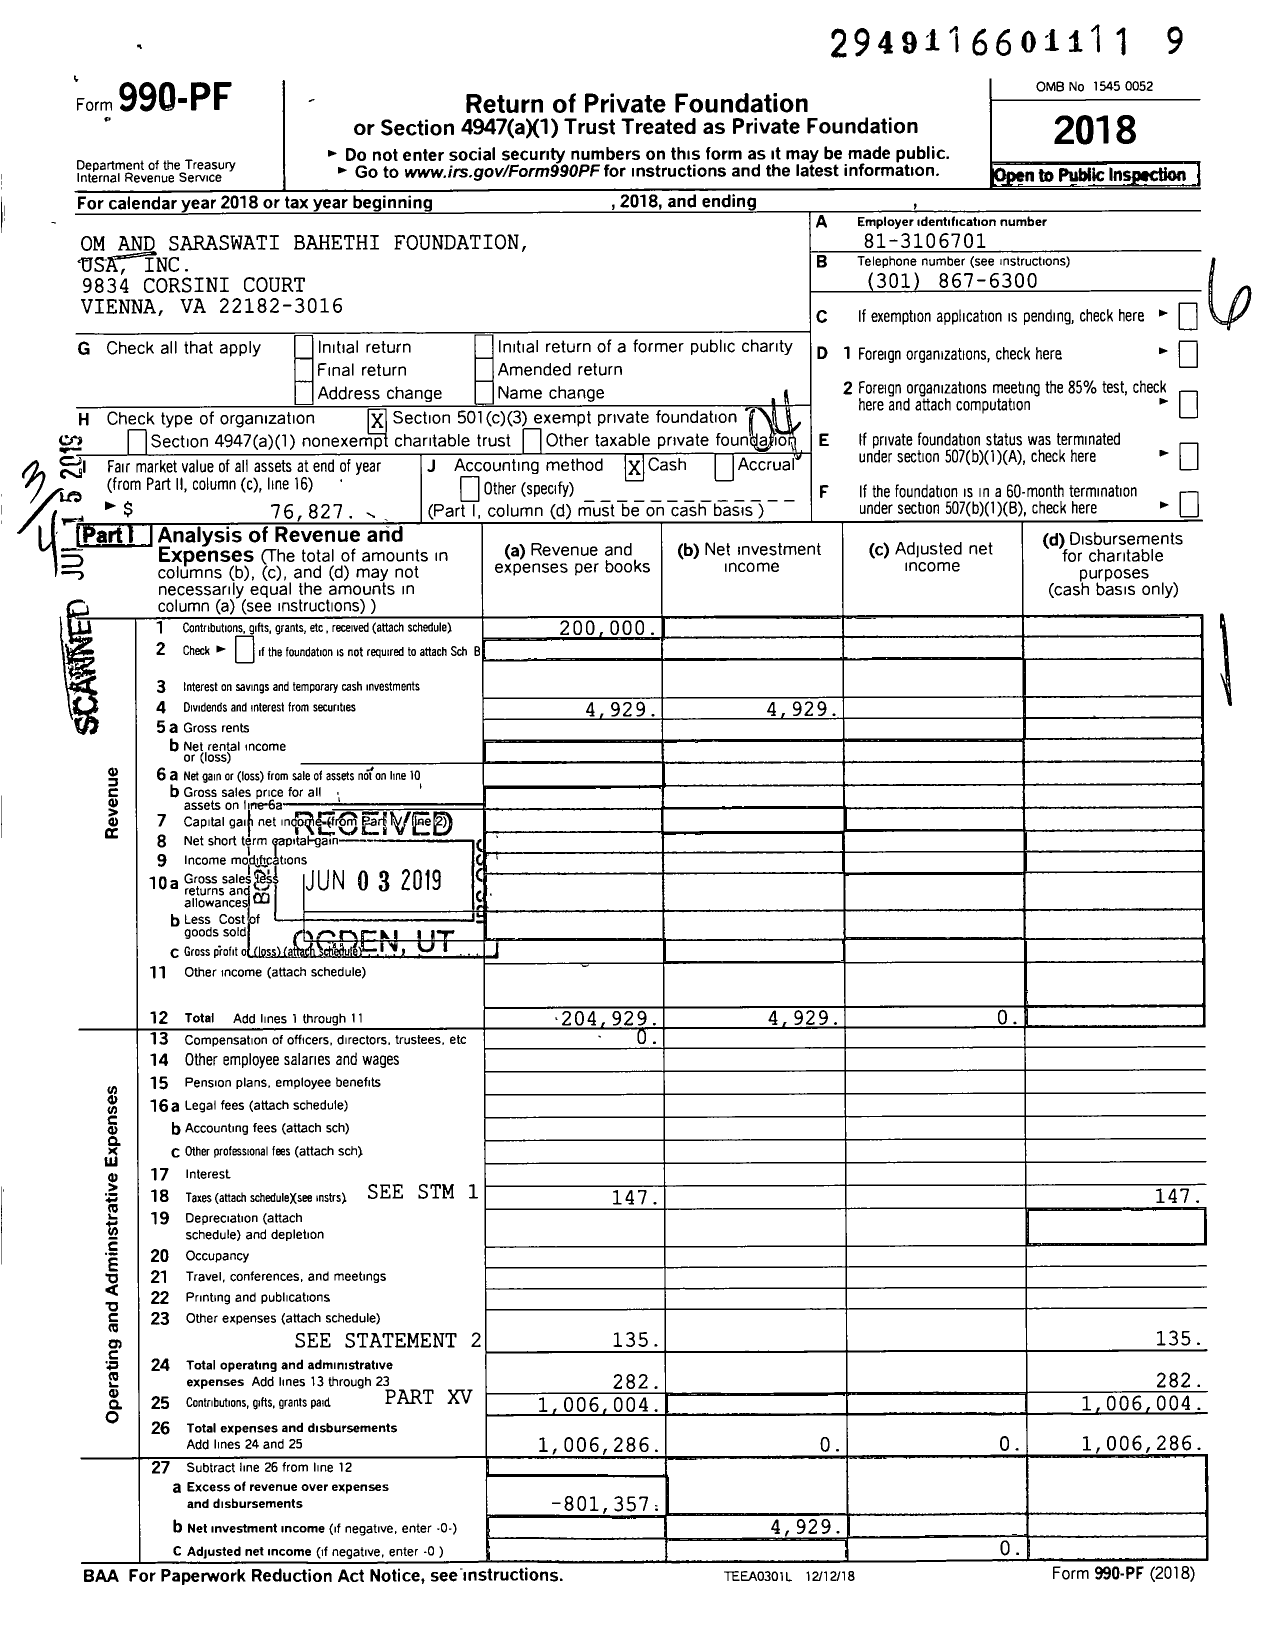 Image of first page of 2018 Form 990PF for Om and Saraswati Bahethi Foundation USA